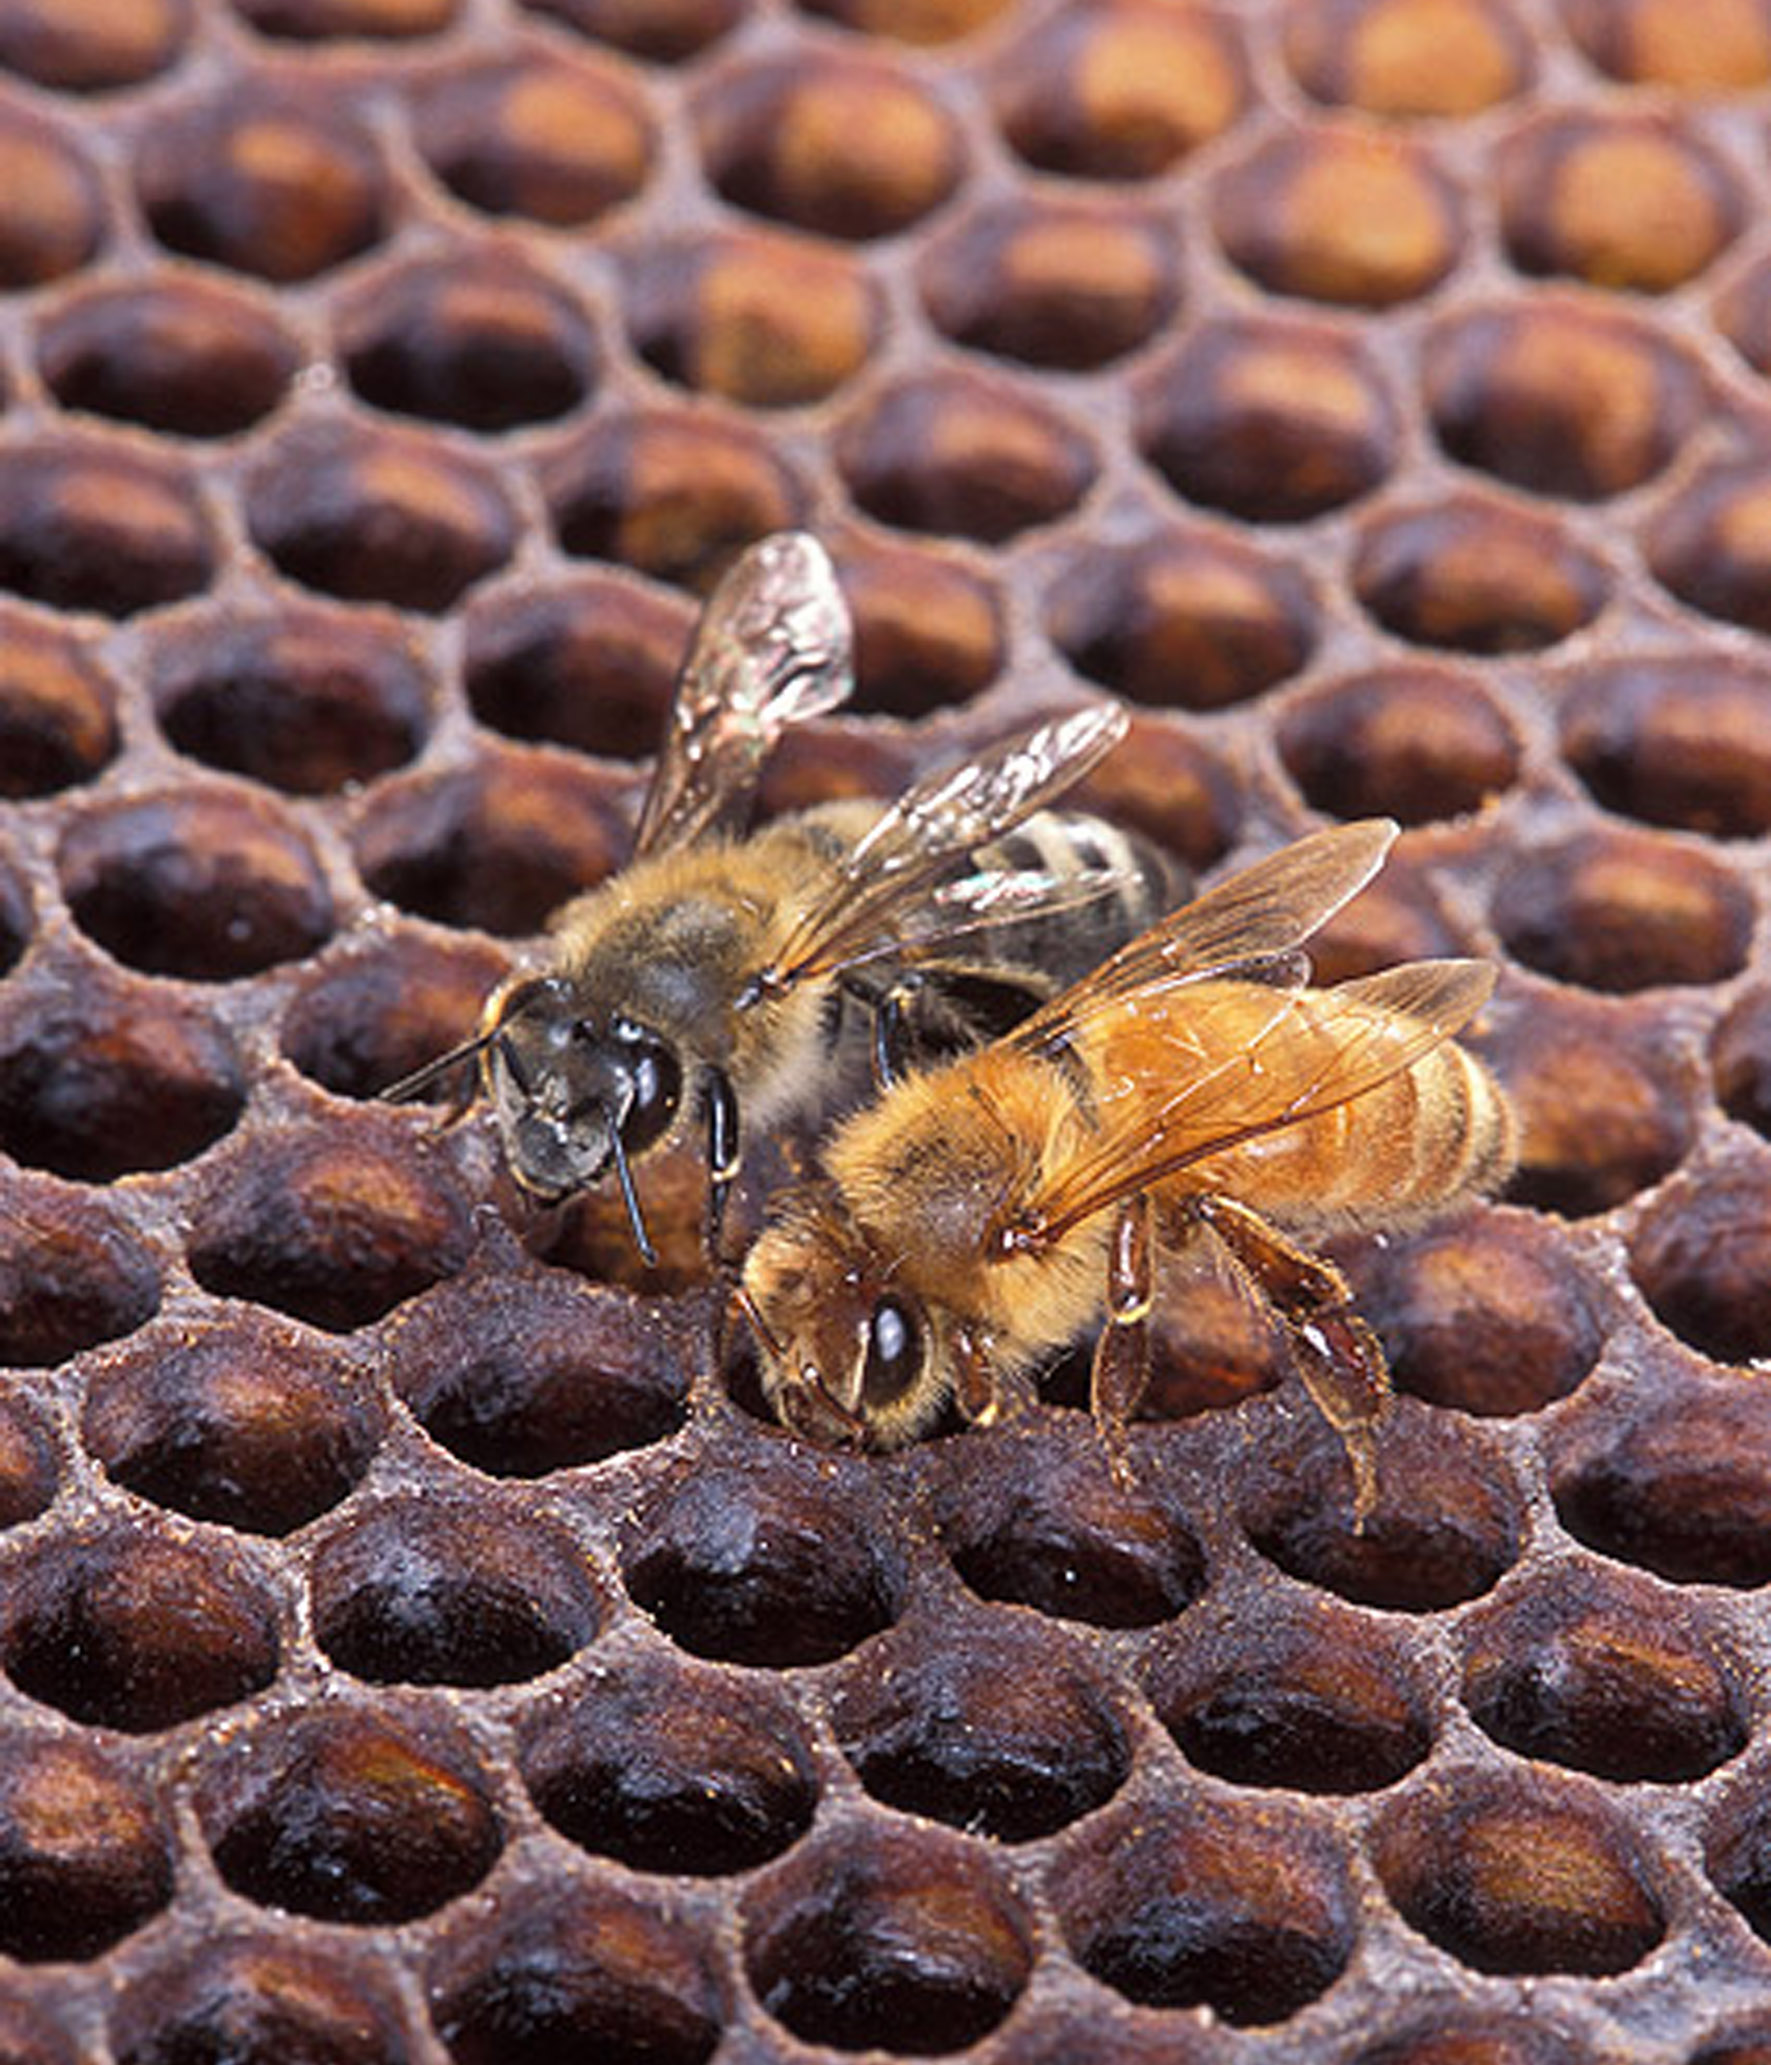 Smithsonian Insider – Native bees prove resilient in competition with